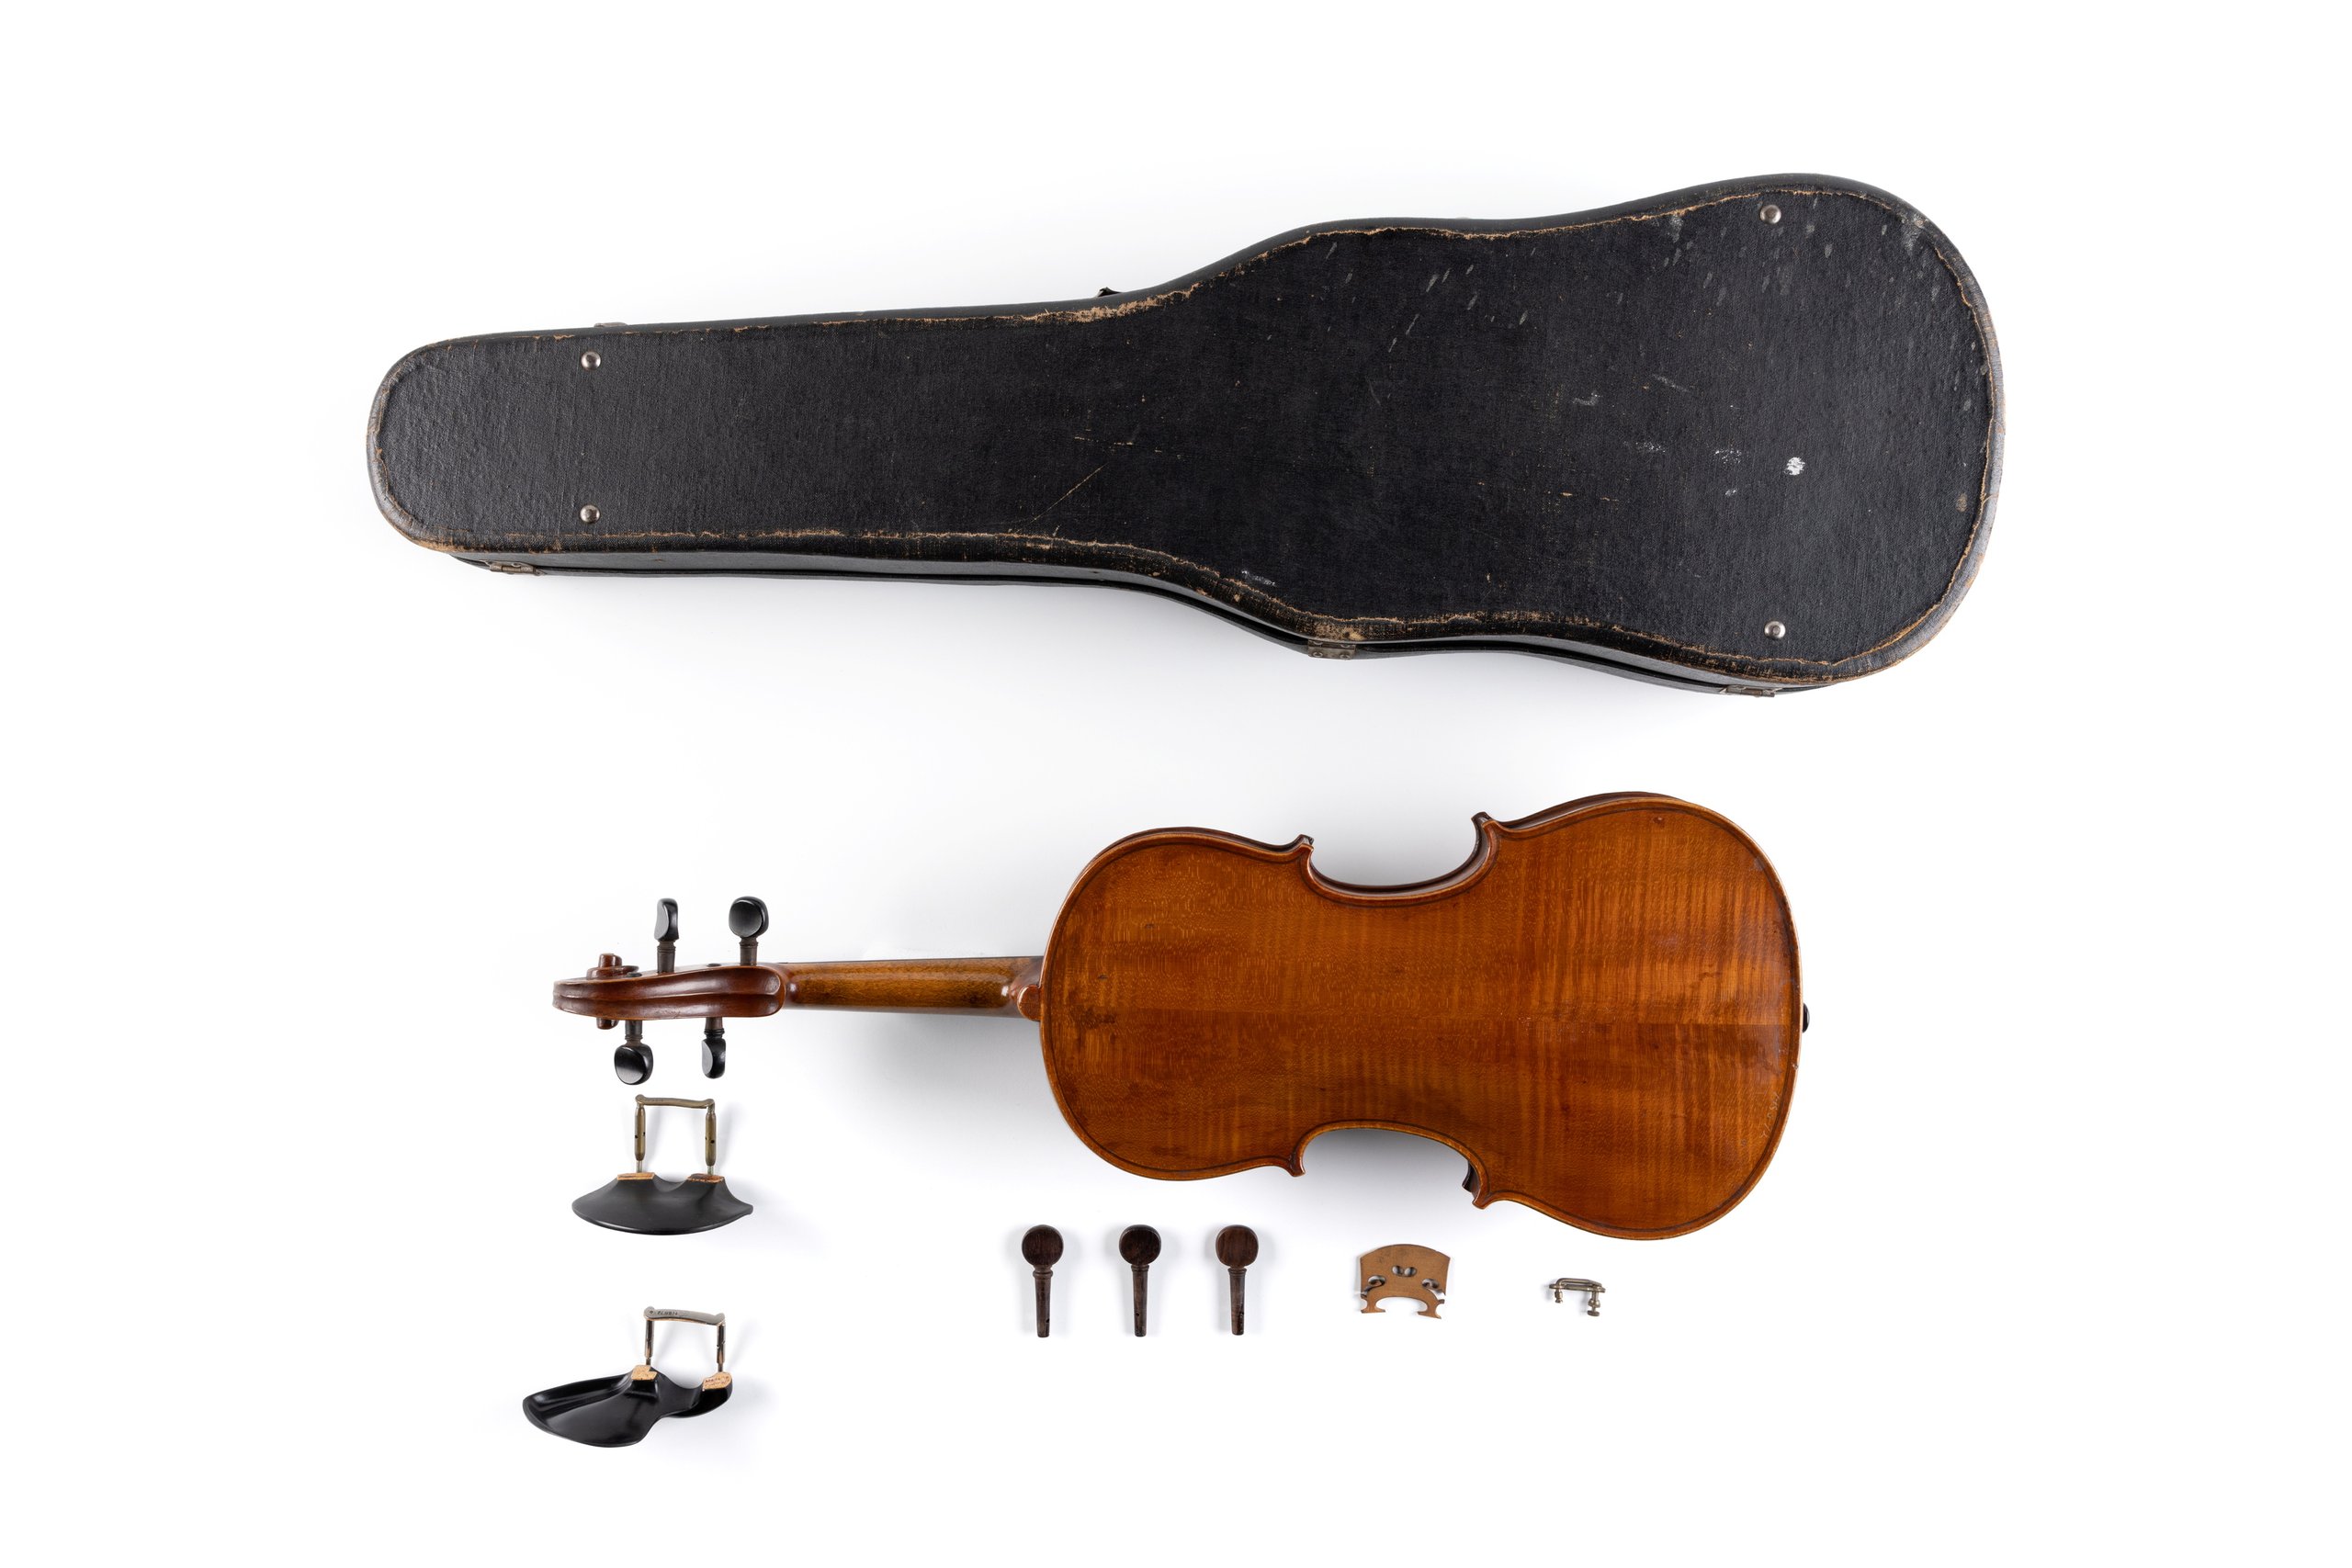 Violin with case and accessories by William Henry Dow